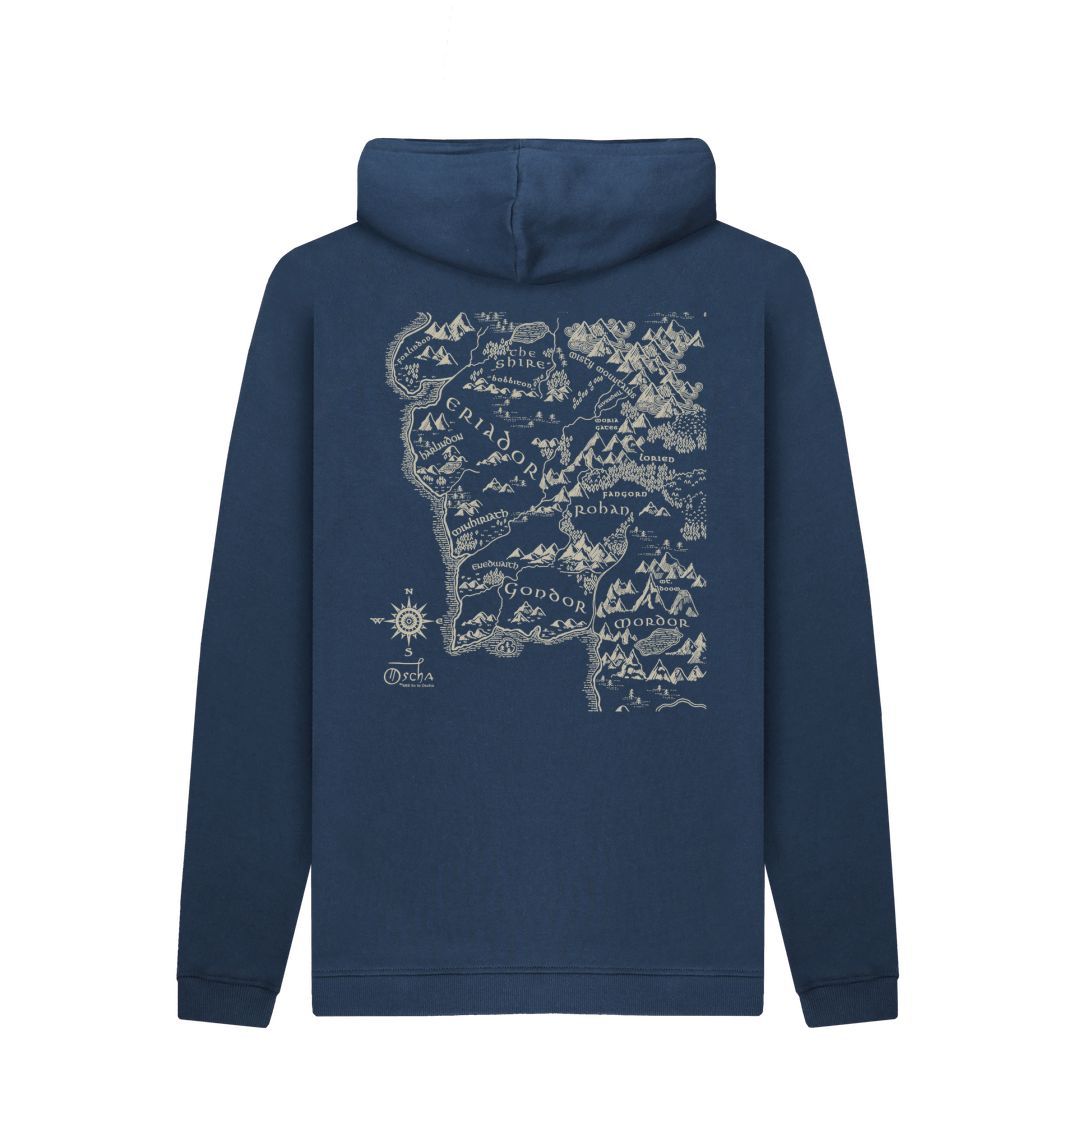 Navy Realm of MIDDLE-EARTH\u2122 Hoodie